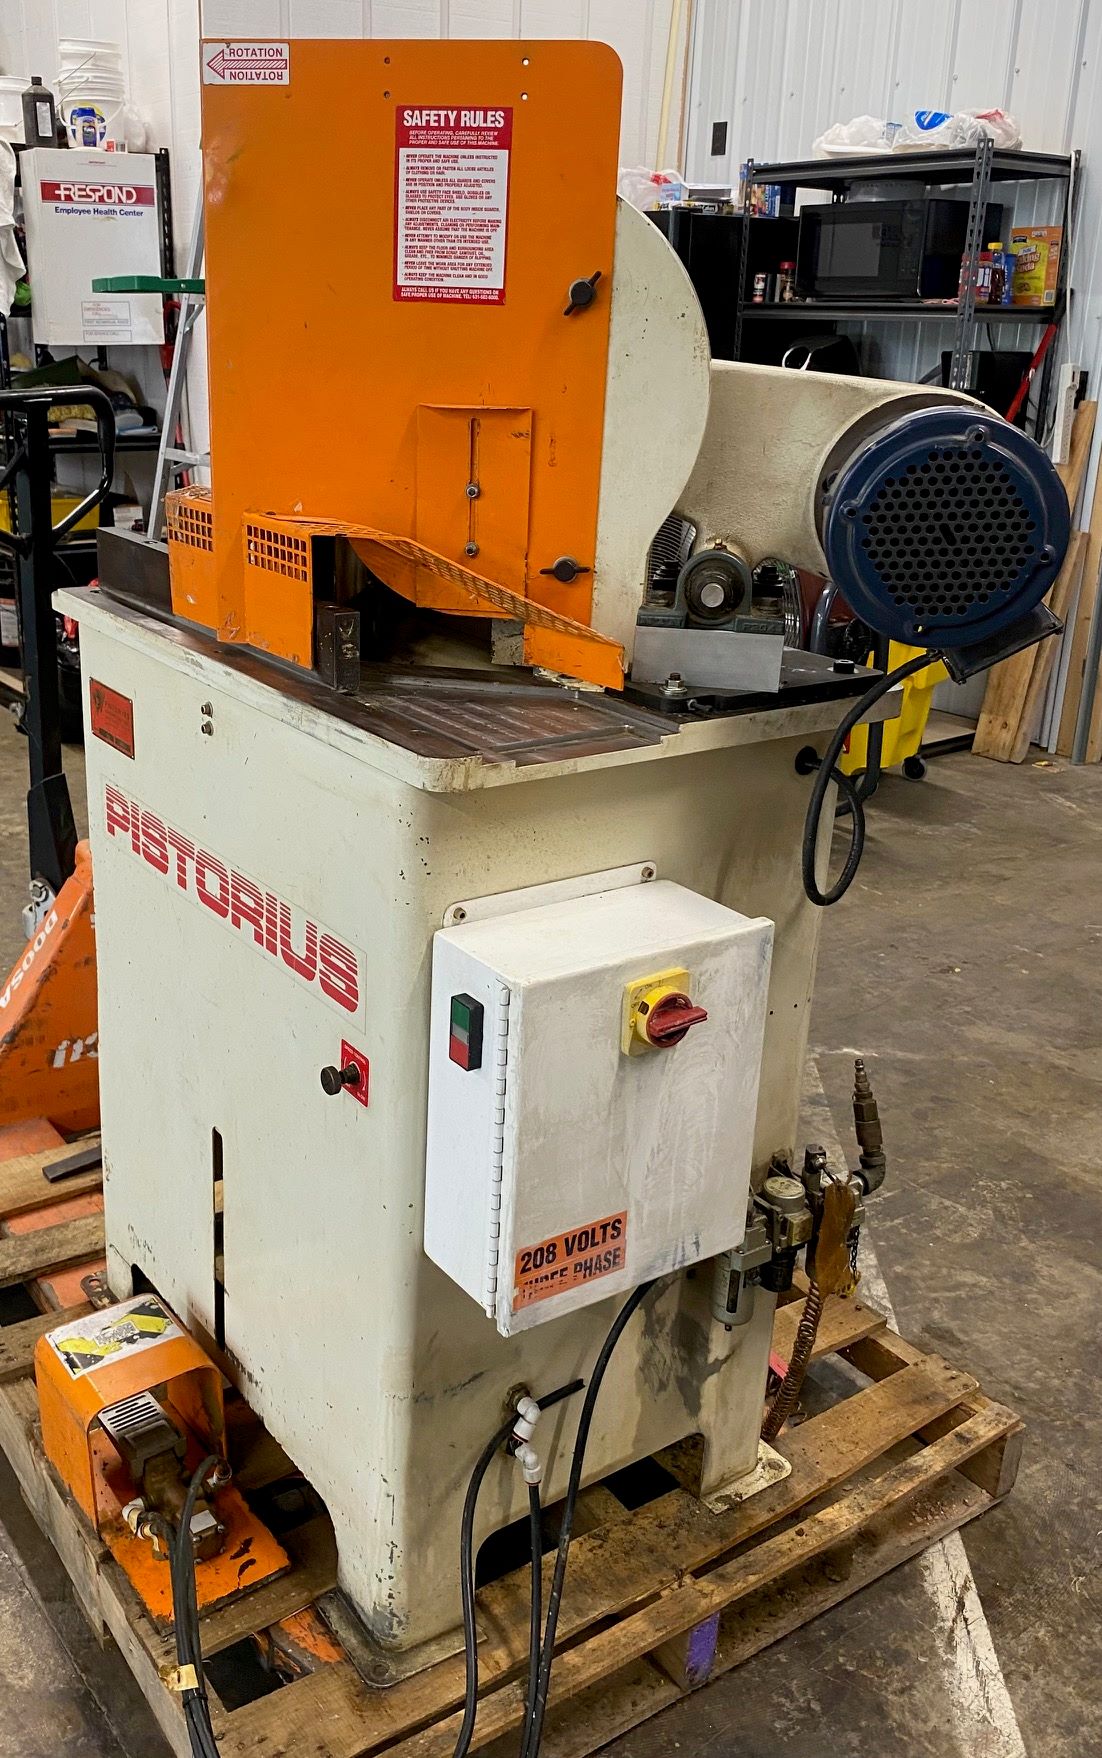 Equipment Lot: Pistorius EMN-14/EMN14 14″ Double Miter Saw, ITW AMP VN4MP Programmable Frame Joiner, Fletcher 3000 Multi Material Cutter (Used) Item # UE-083123C